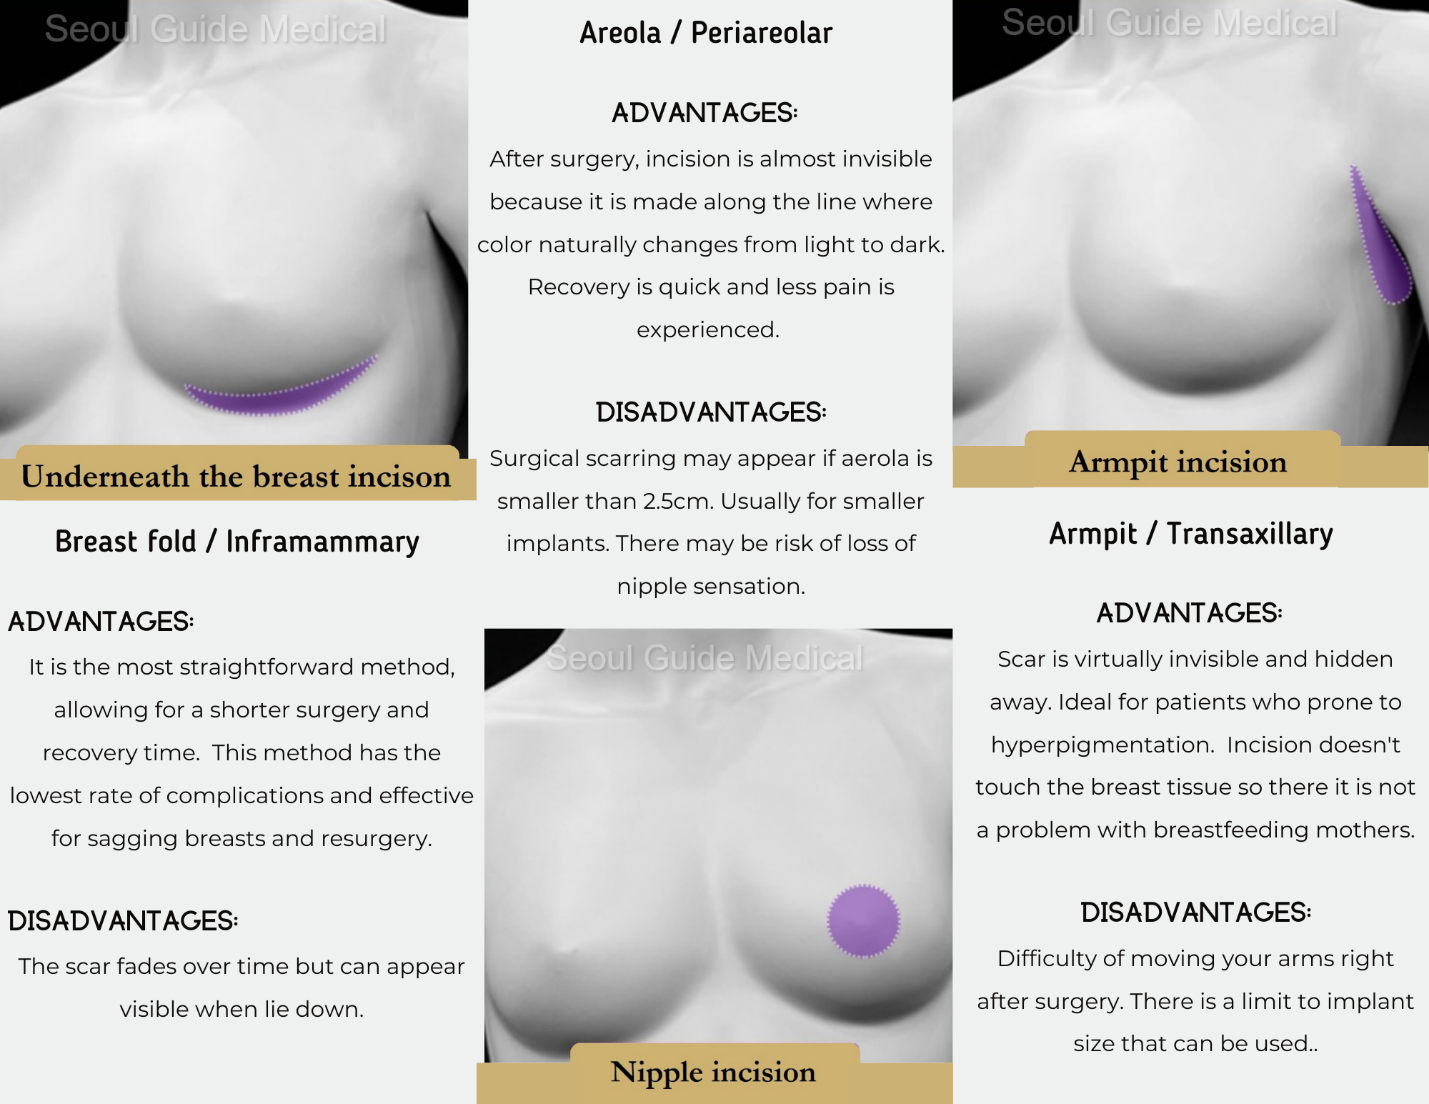 Your Guide To Breast Augmentation in Korea This 2022 - Seoul Guide Medical